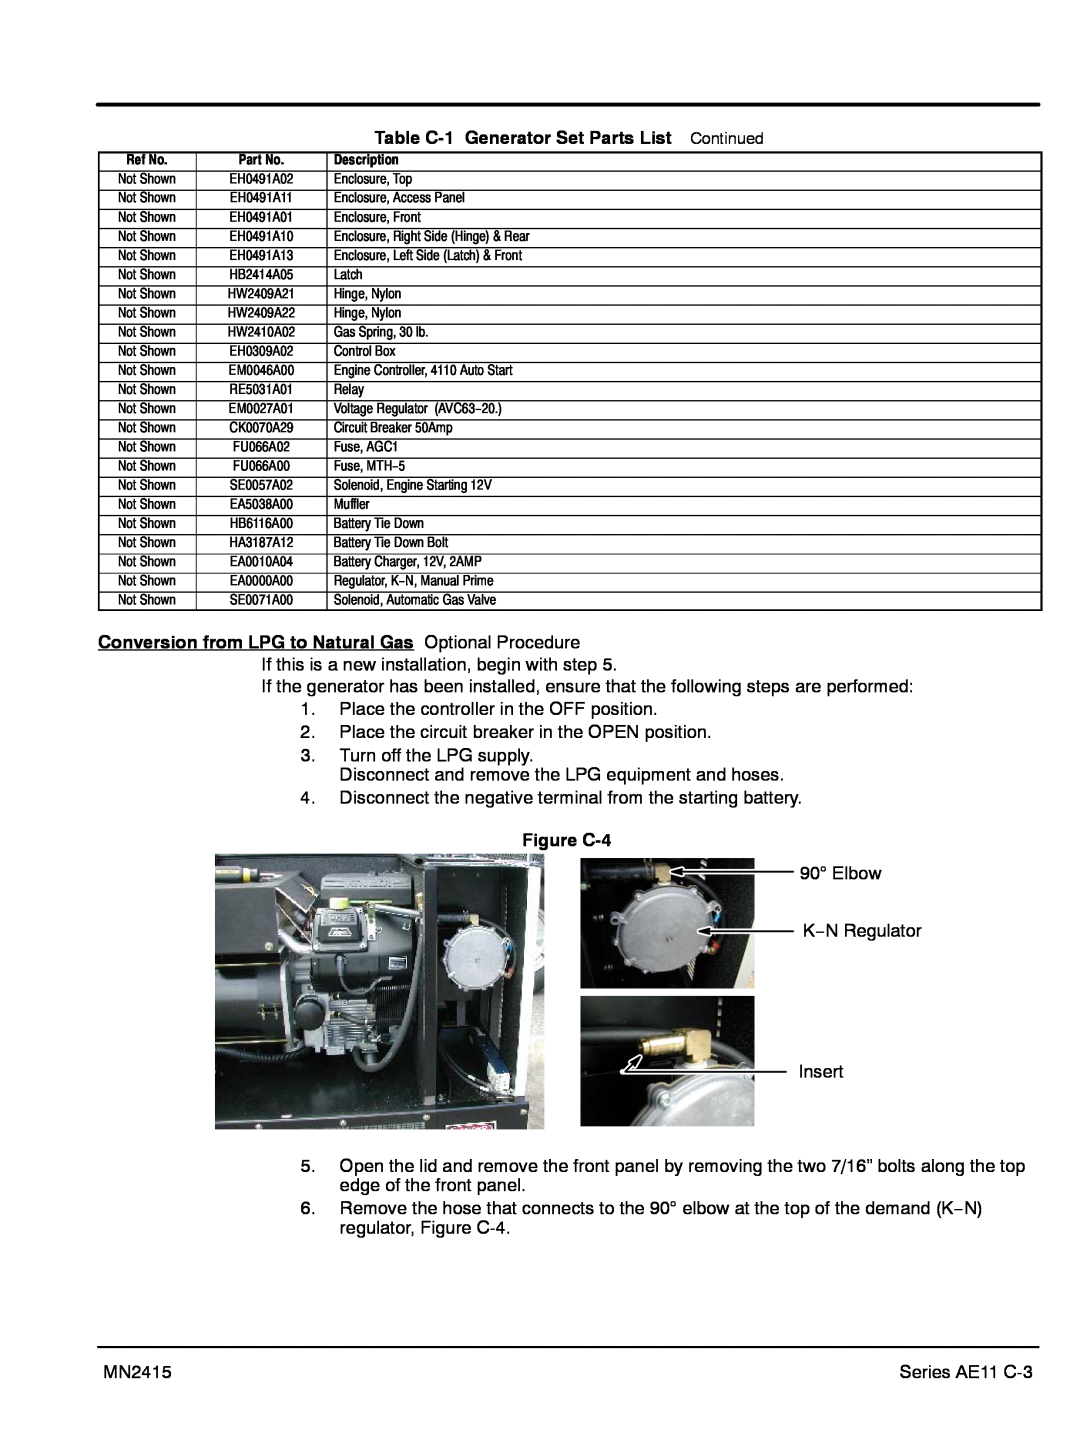 Baldor AE8 Table C-1 Generator Set Parts List Continued, Conversion from LPG to Natural Gas Optional Procedure, Figure C-4 